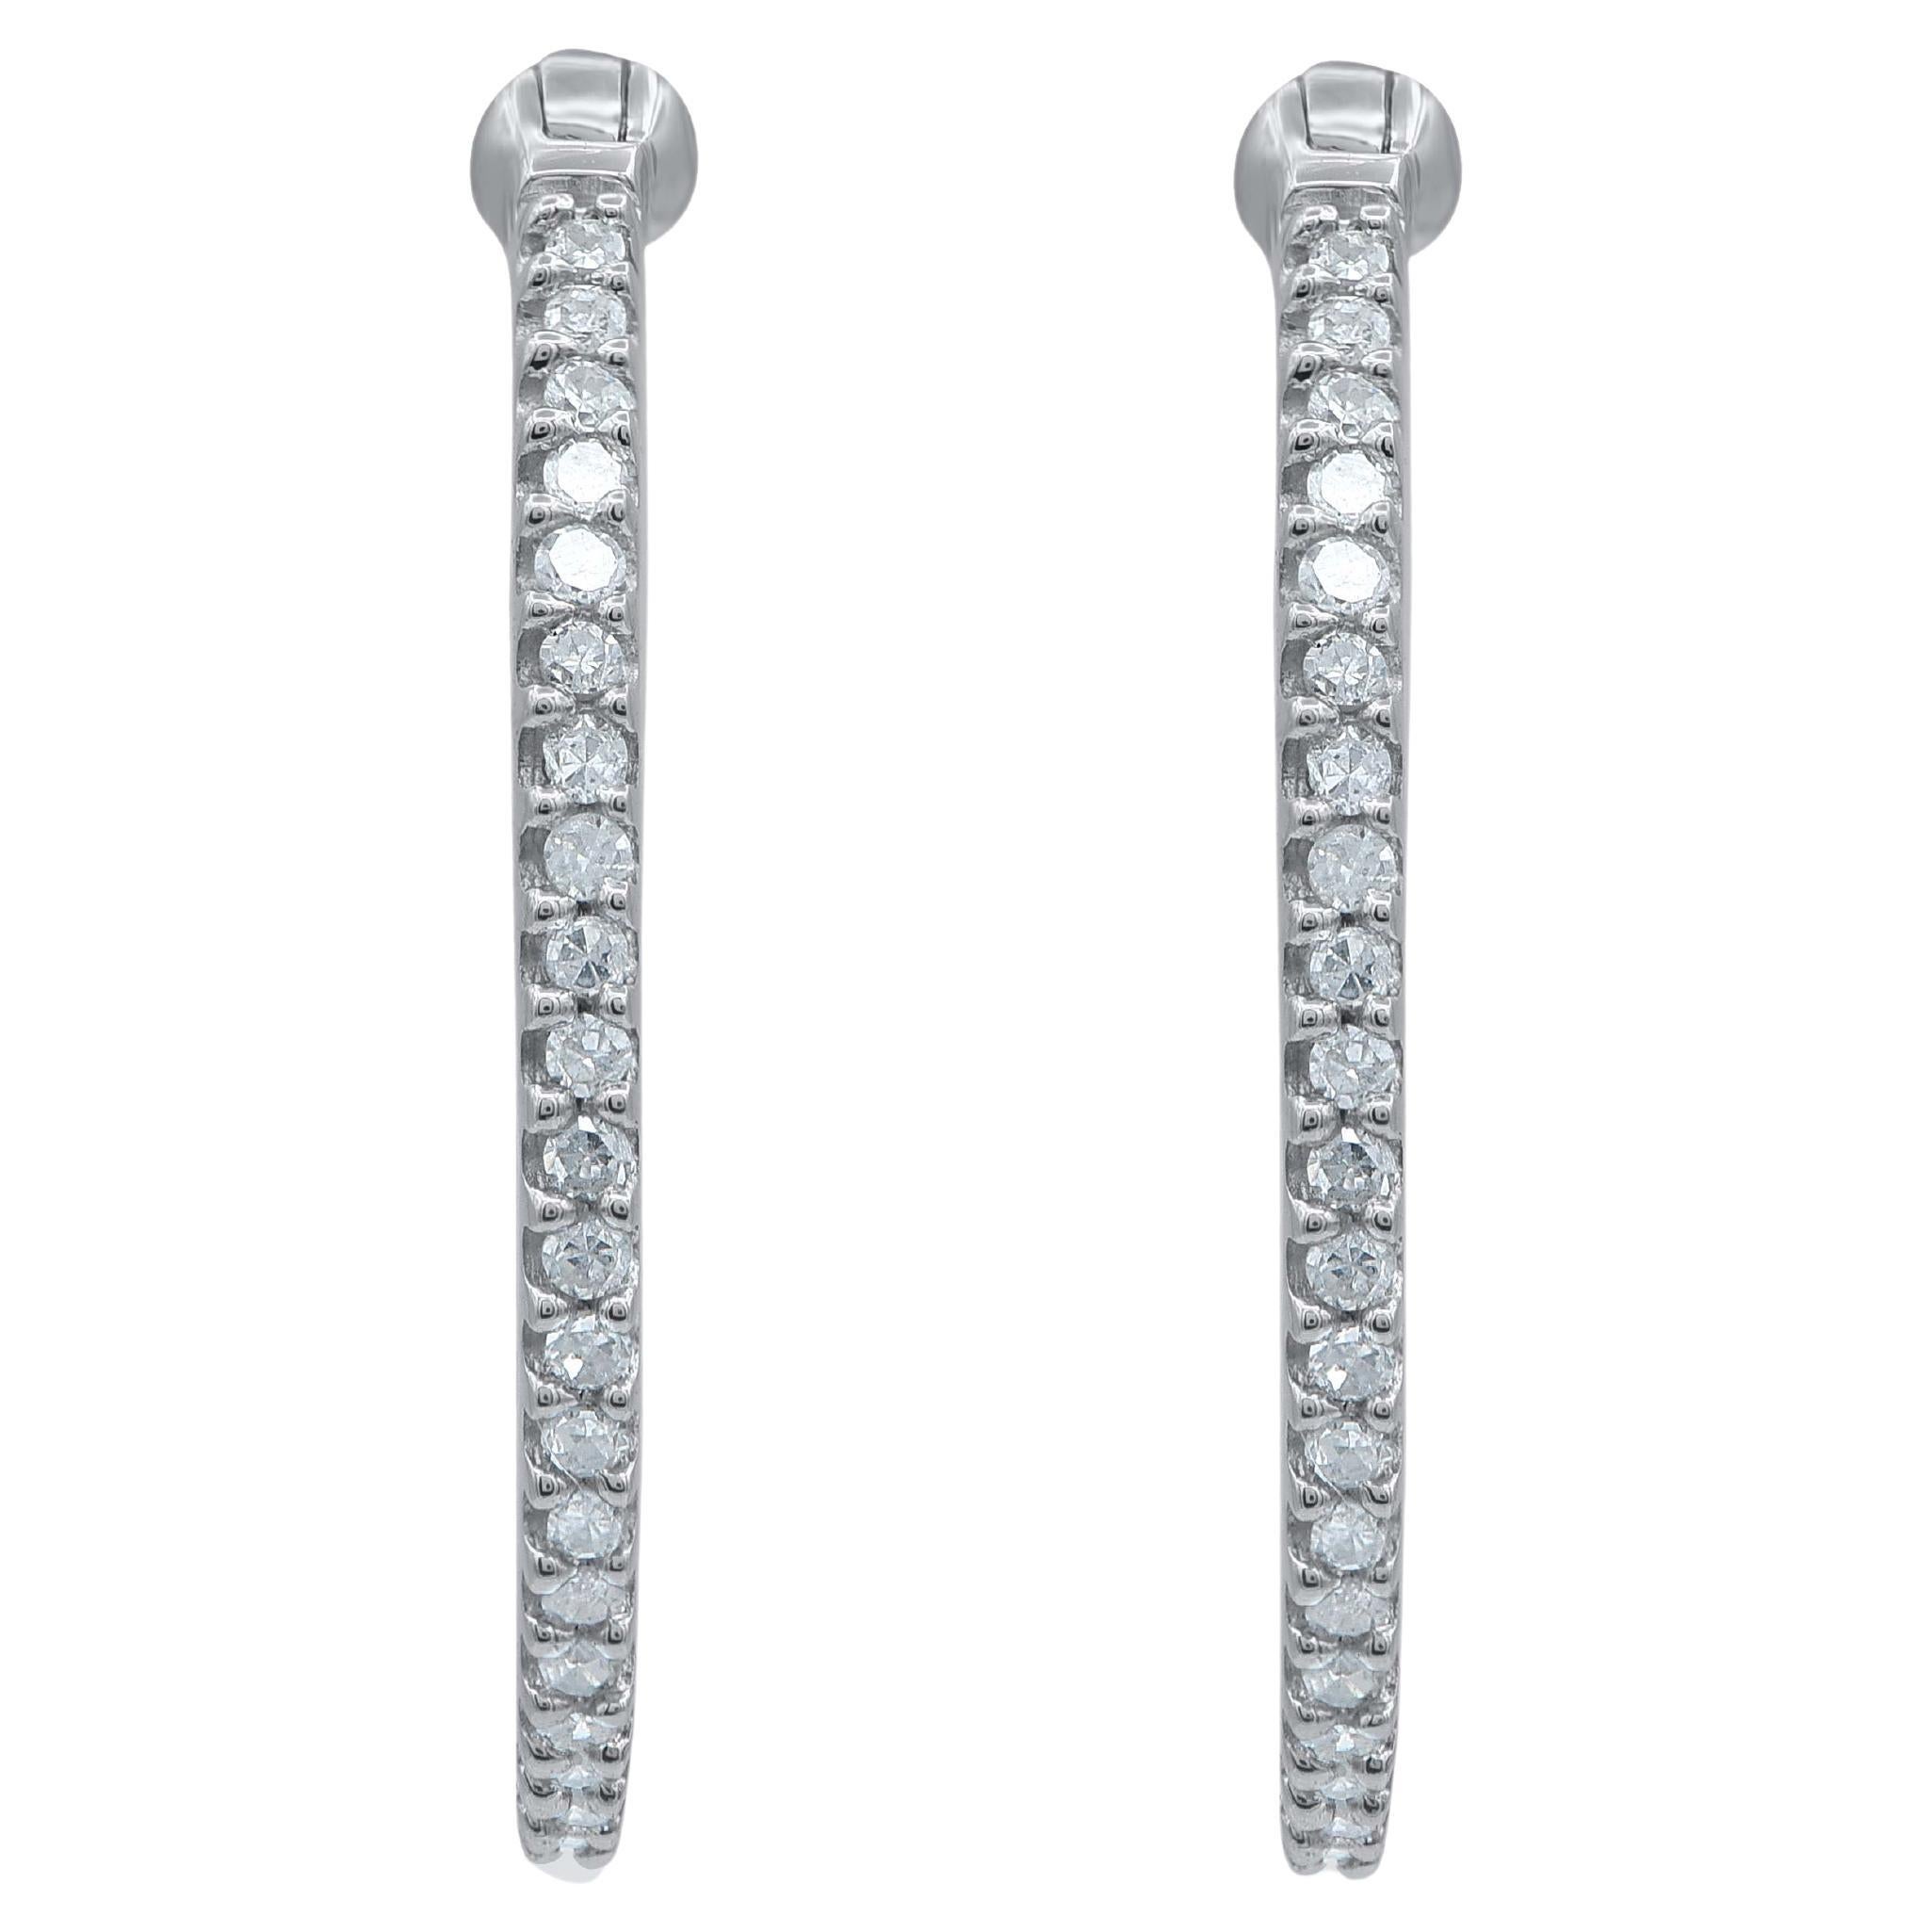 A style must-have, these diamond hoop earrings dress up any look. Crafted in 14 karat white gold with 82 single cut round diamond in prong setting. These earring secure with hinged backs. Total diamond weight is 0.25 carat. The white diamonds are